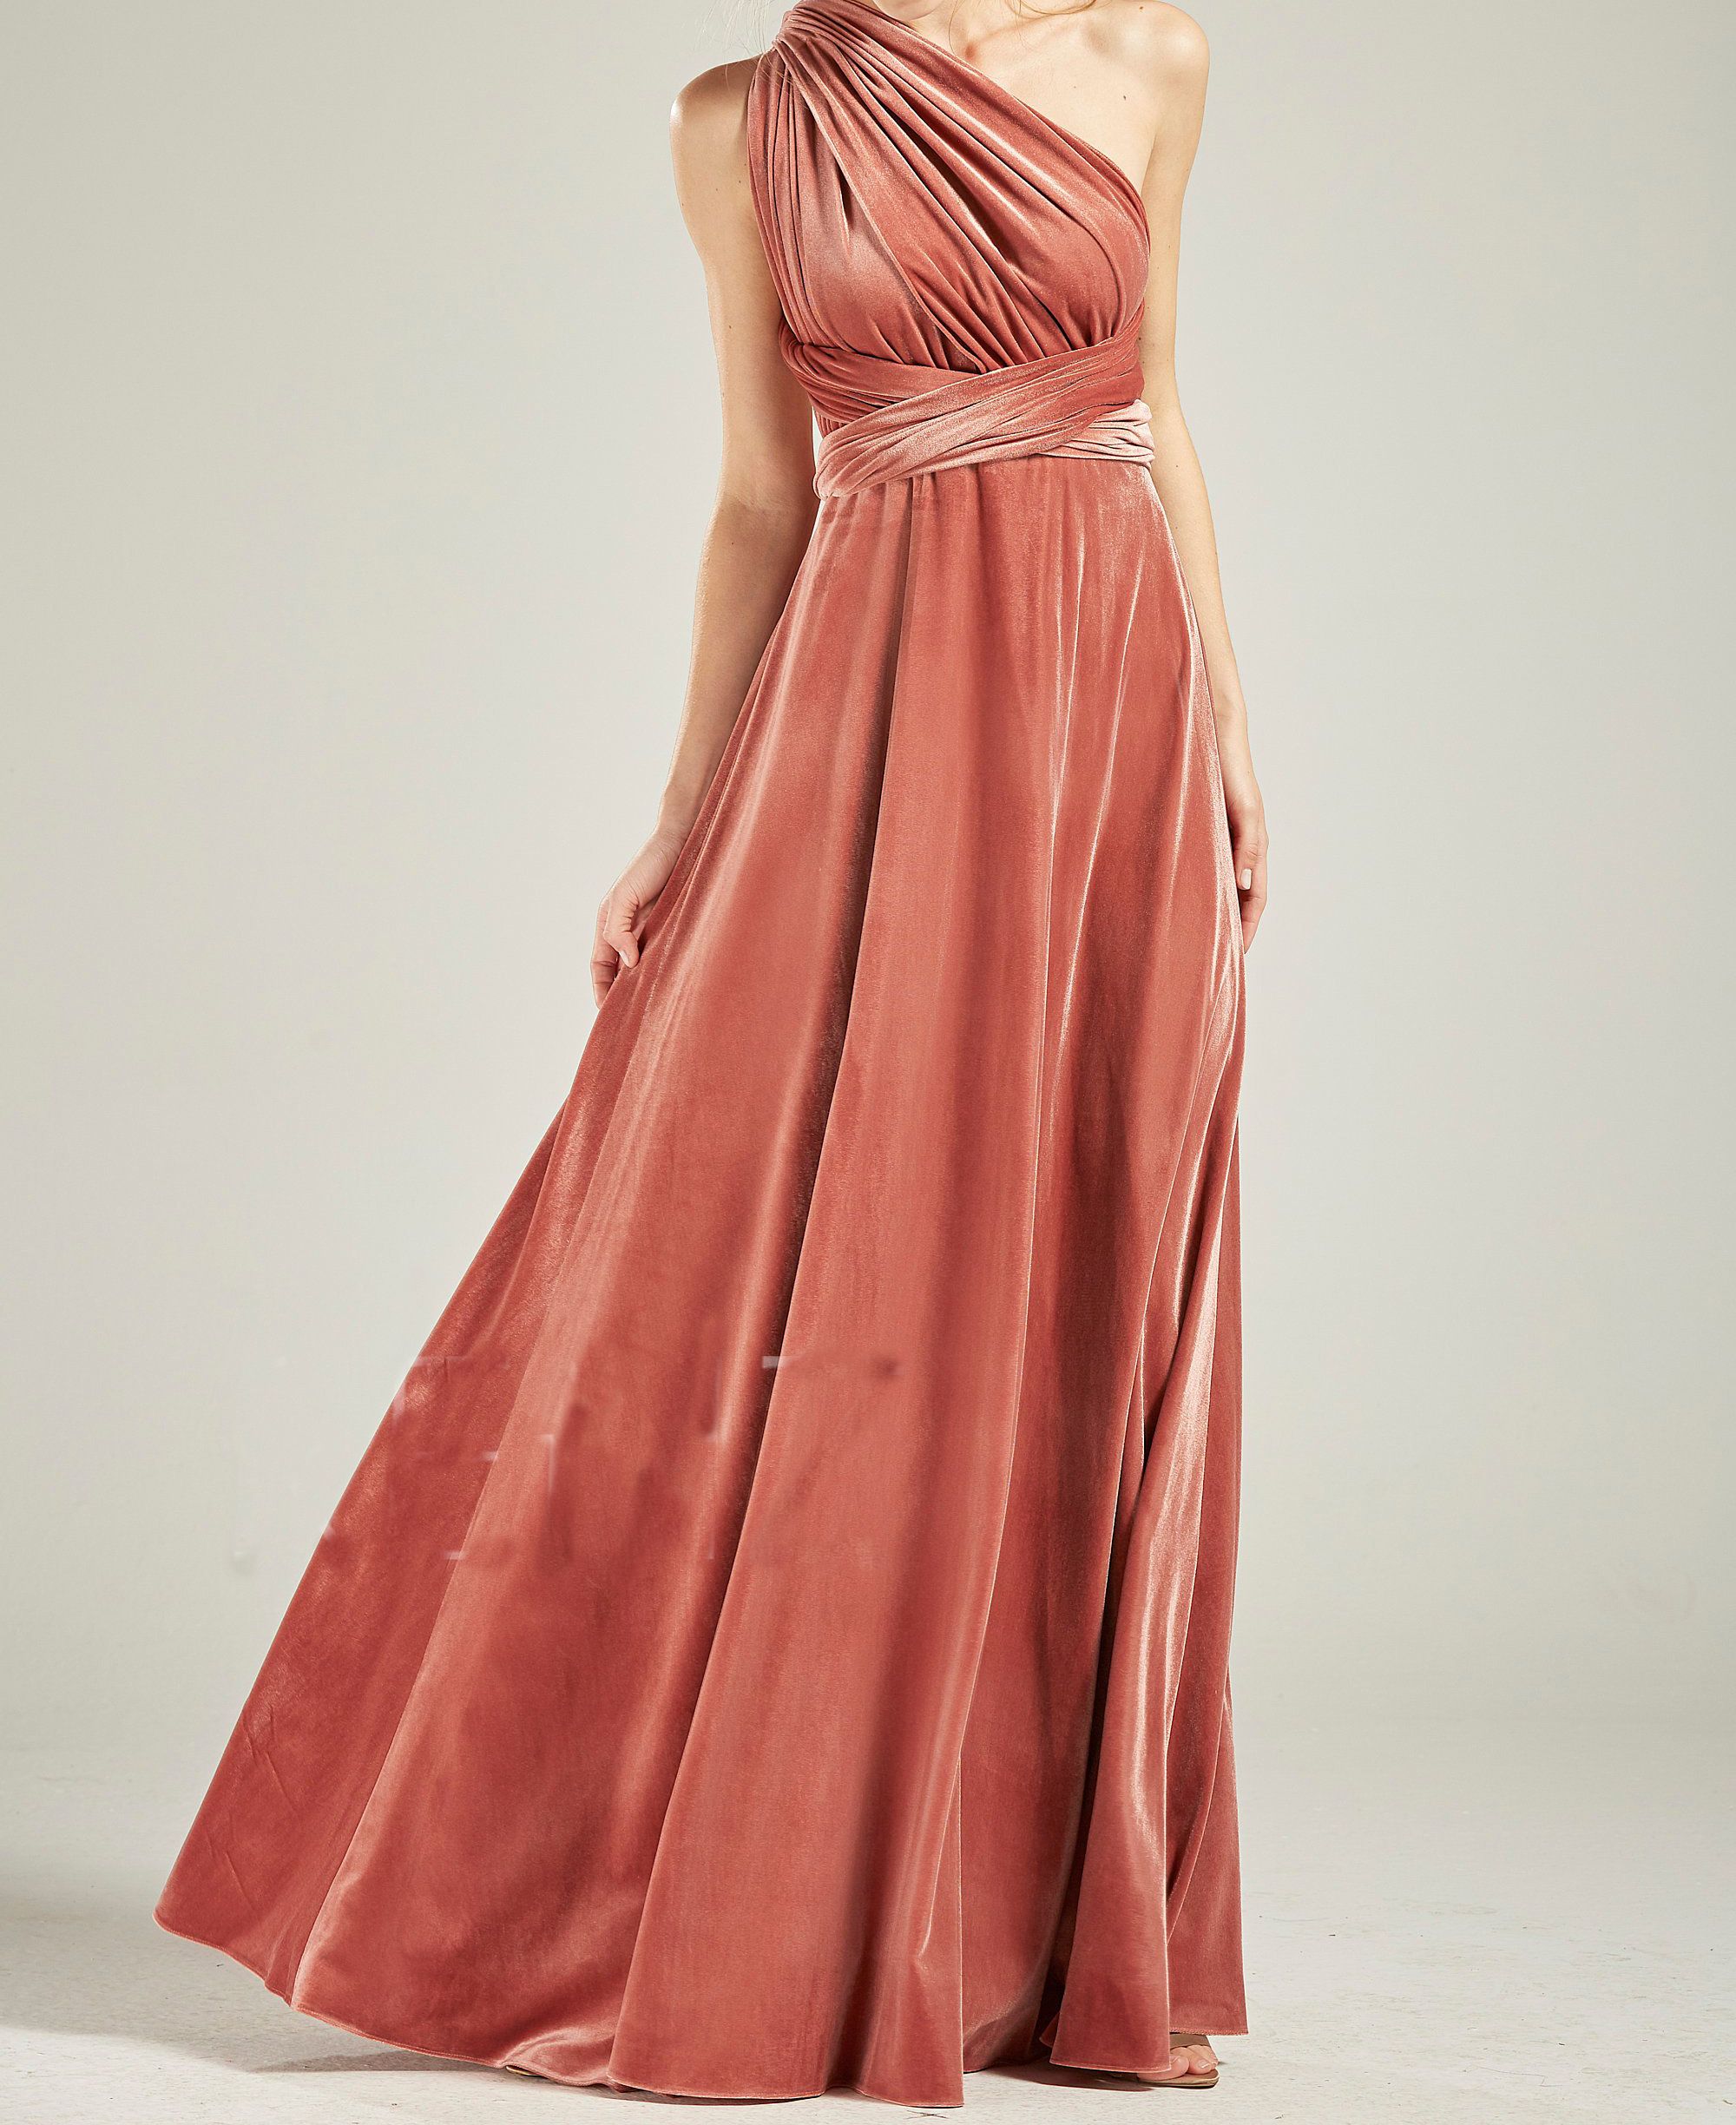 Velvet Infinity Bridesmaid Dress Criss Cross Straps Maxi Dress Convertible  Straps A Line Wrap Prom Dress From Blooming_cici, $126.64